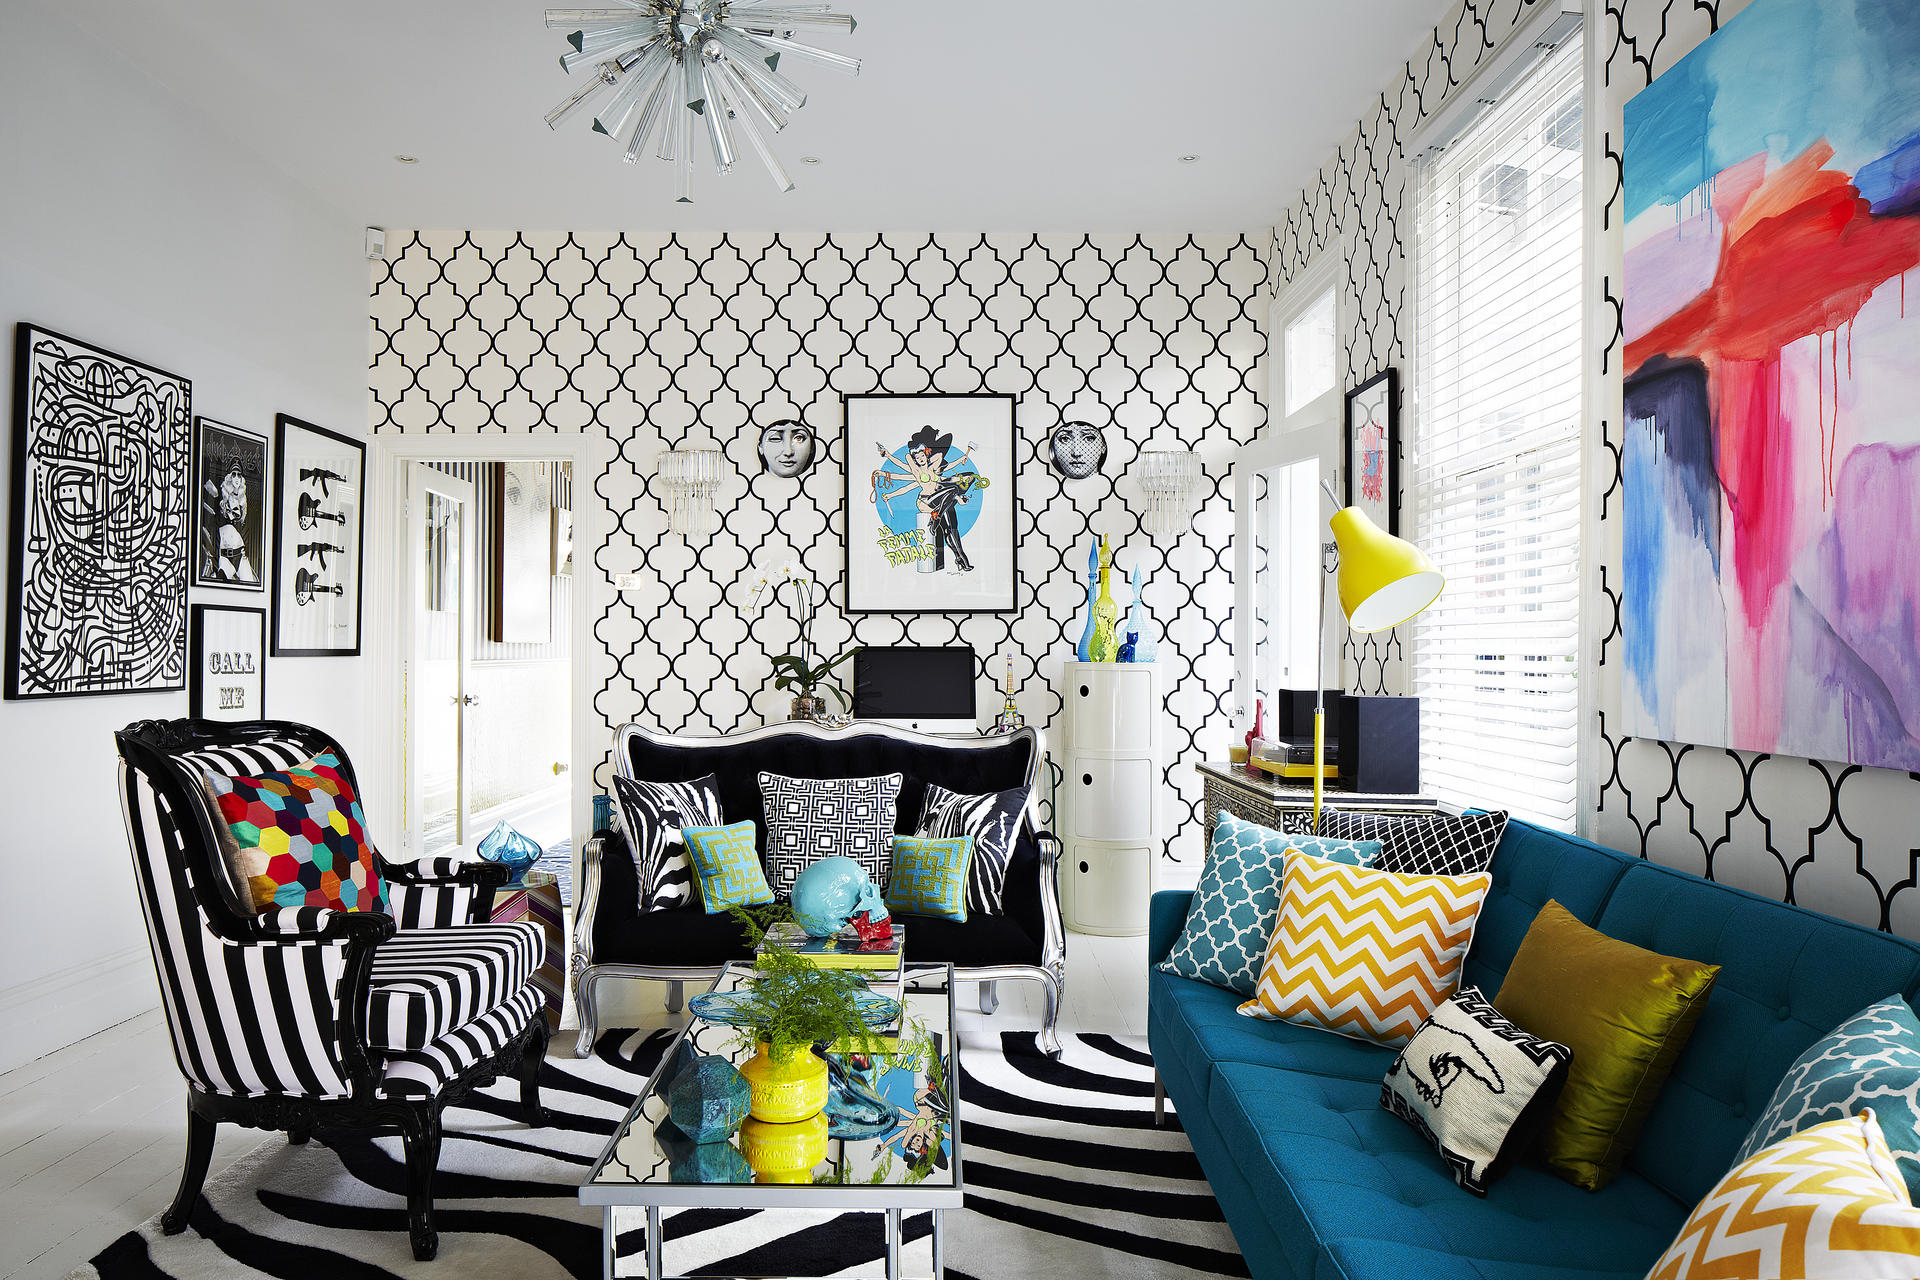 Vanessa Kortlang's home is colourful and loud, a perfect expression of her character. A mix of couches in different shapes and sizes and black-and-white prints co-exist harmoniously.